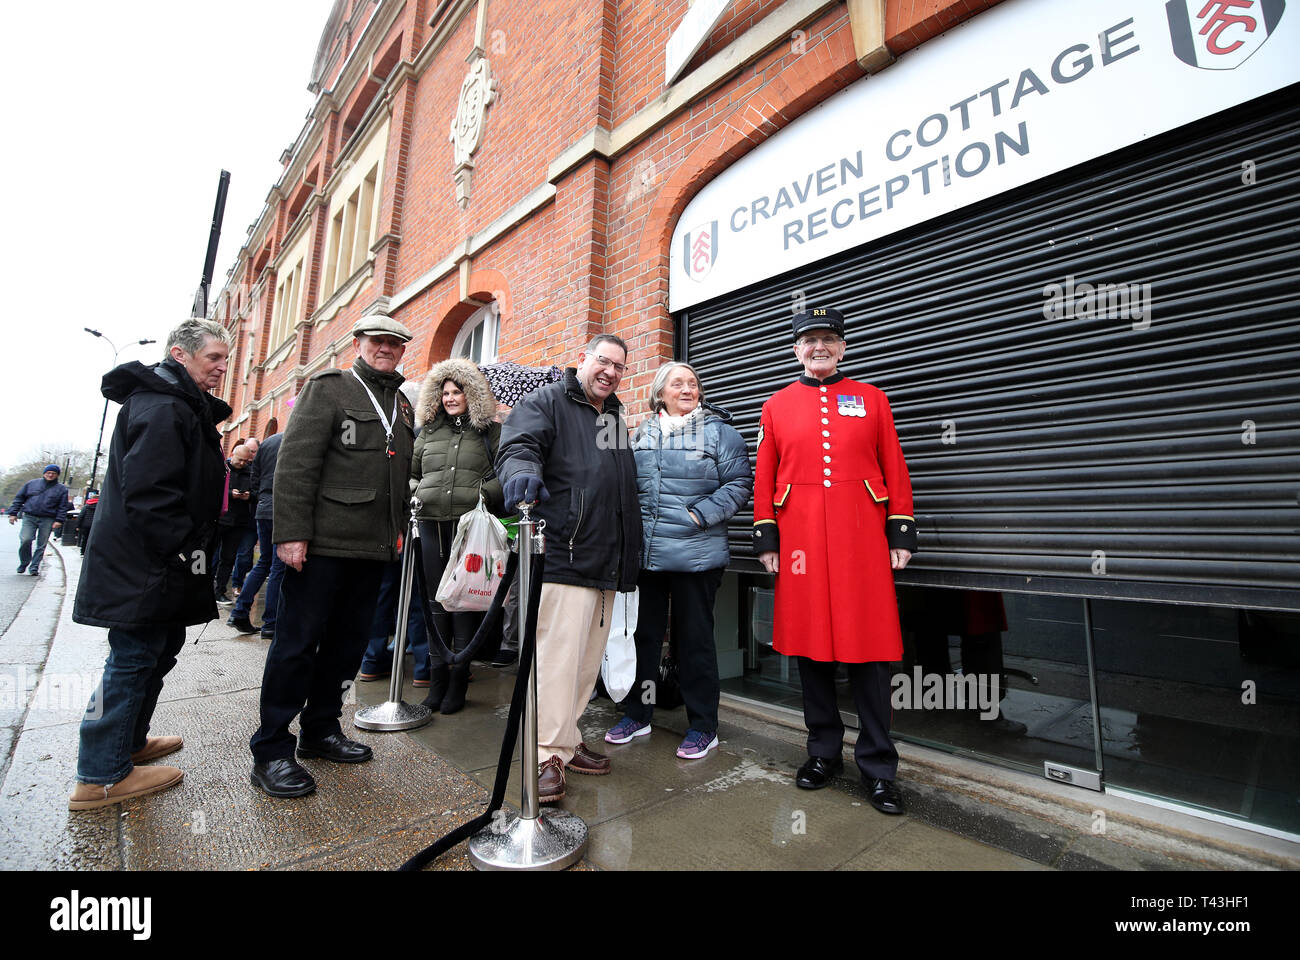 Chelsea pensioner Walter Swan heads the queue of people at reception before the Premier League match at Craven Cottage, London. Stock Photo